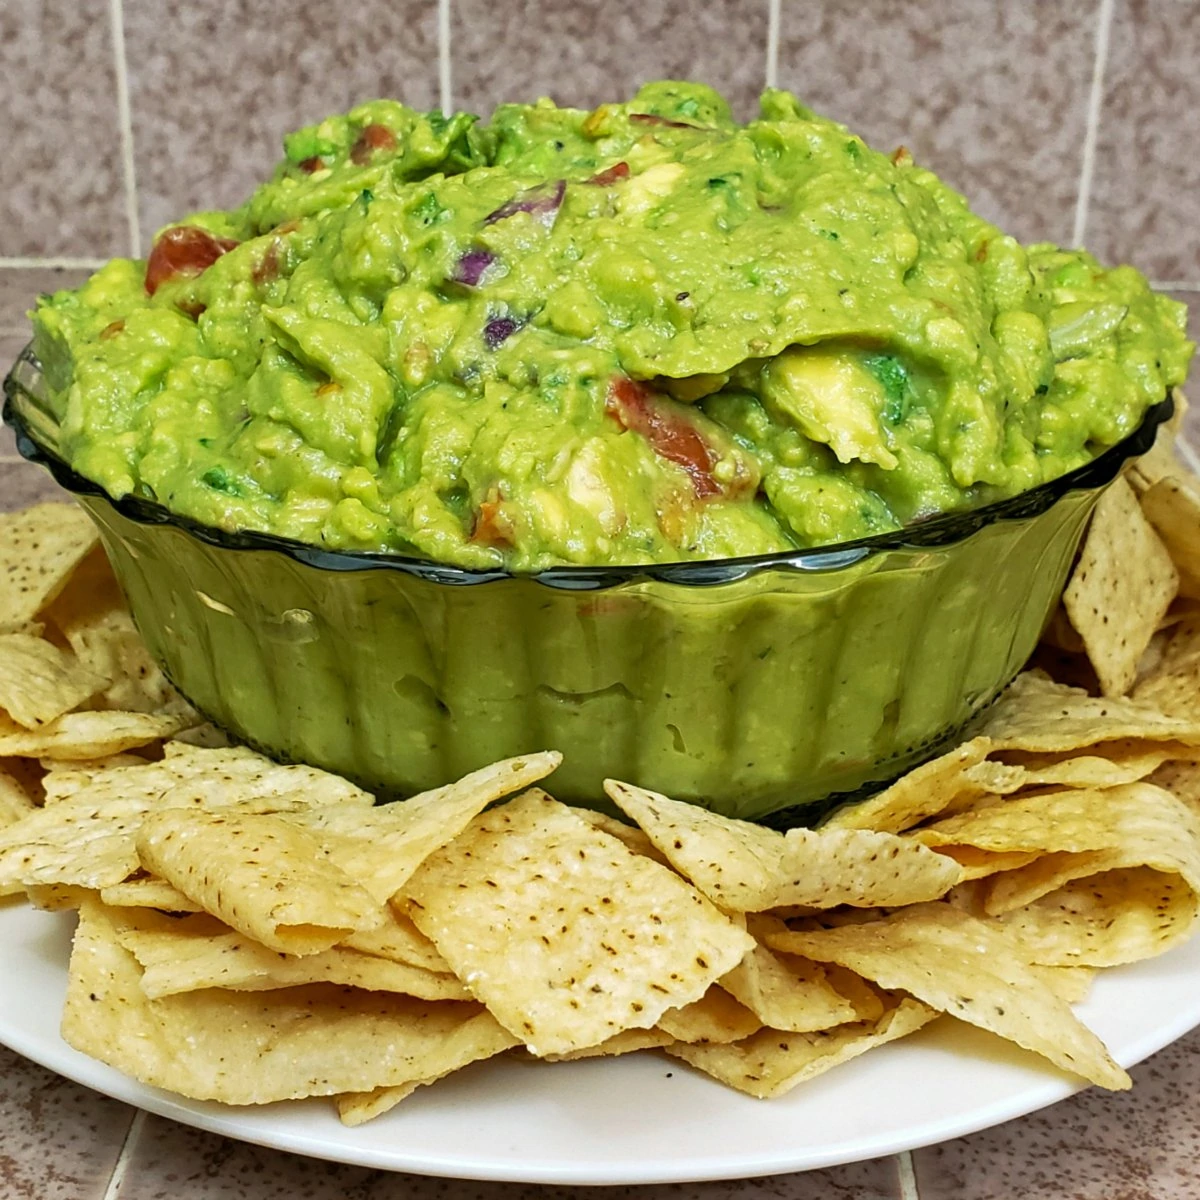 Homemade guacamole served with tortilla chips.